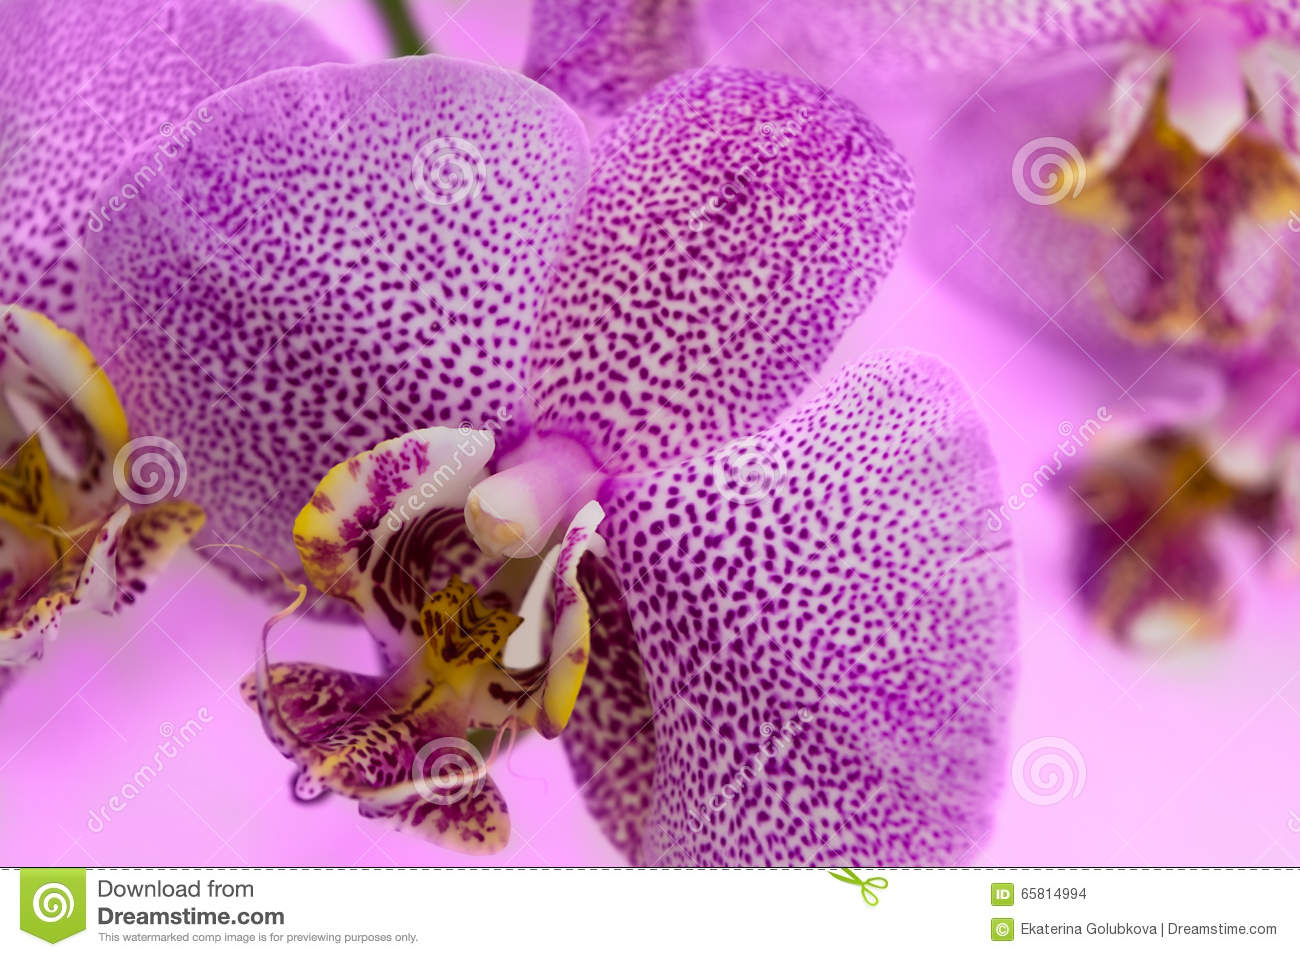 Leopard Orchid clipart #11, Download drawings